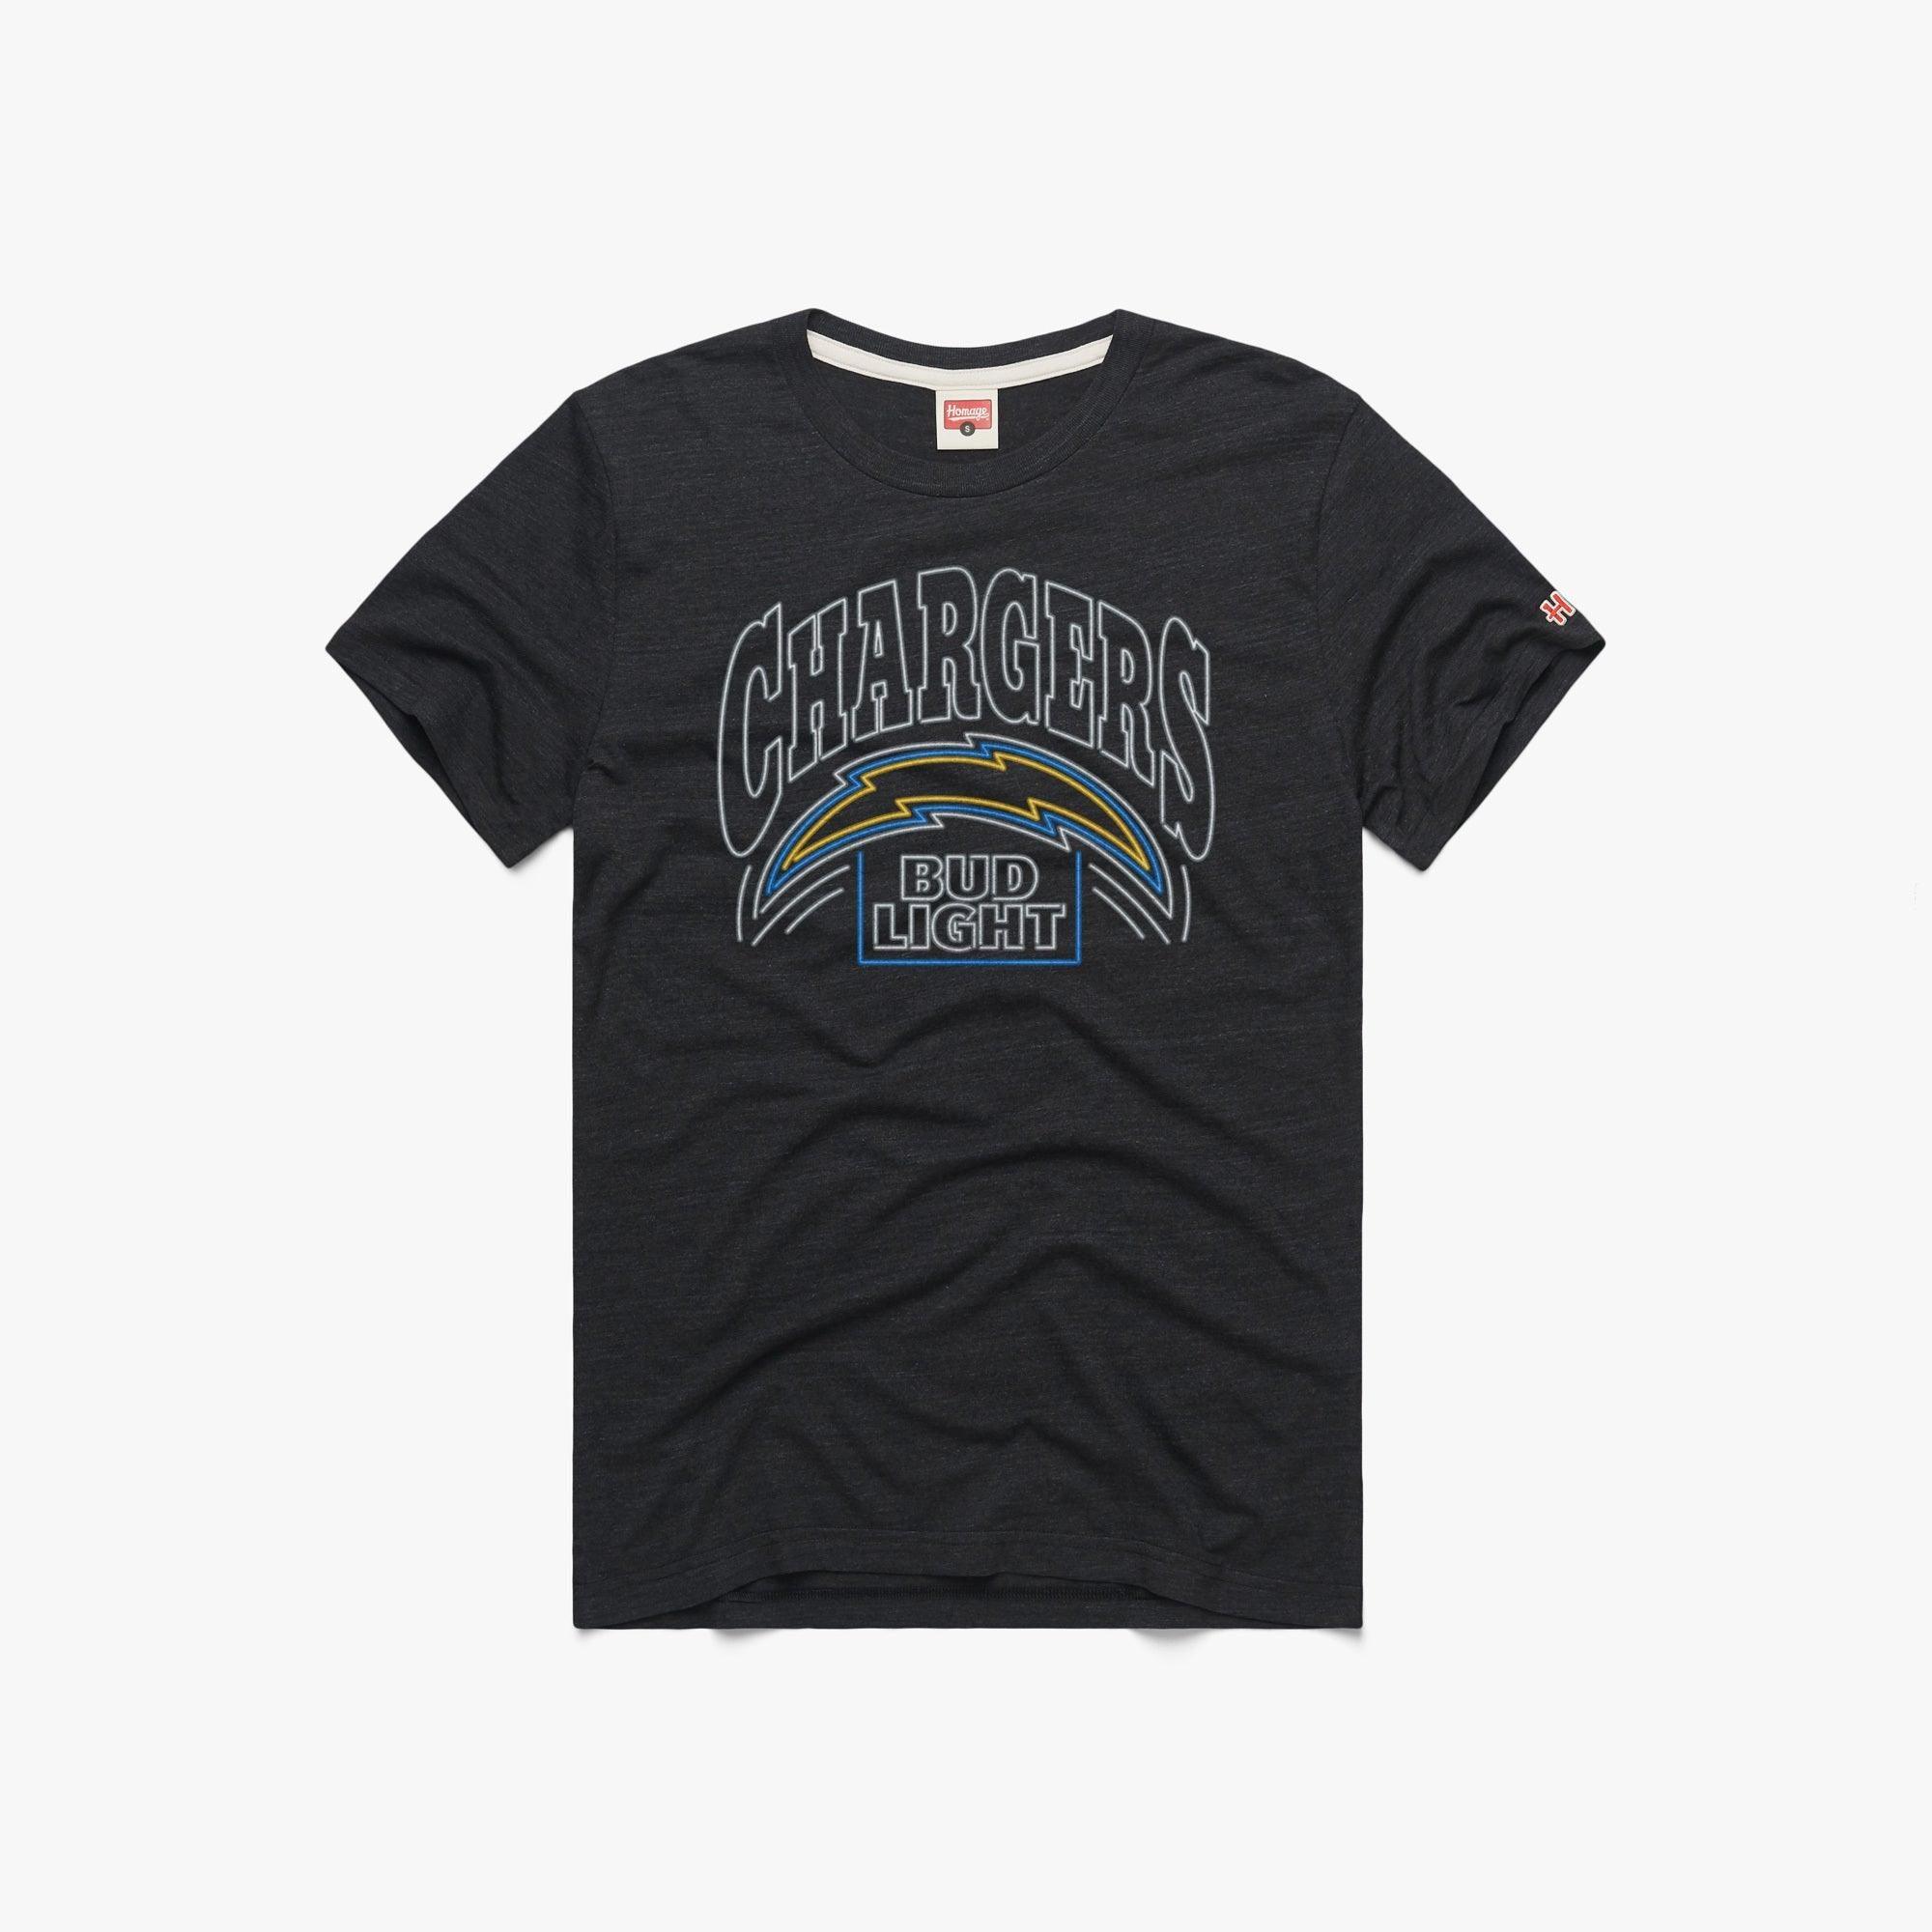 san diego chargers shirt